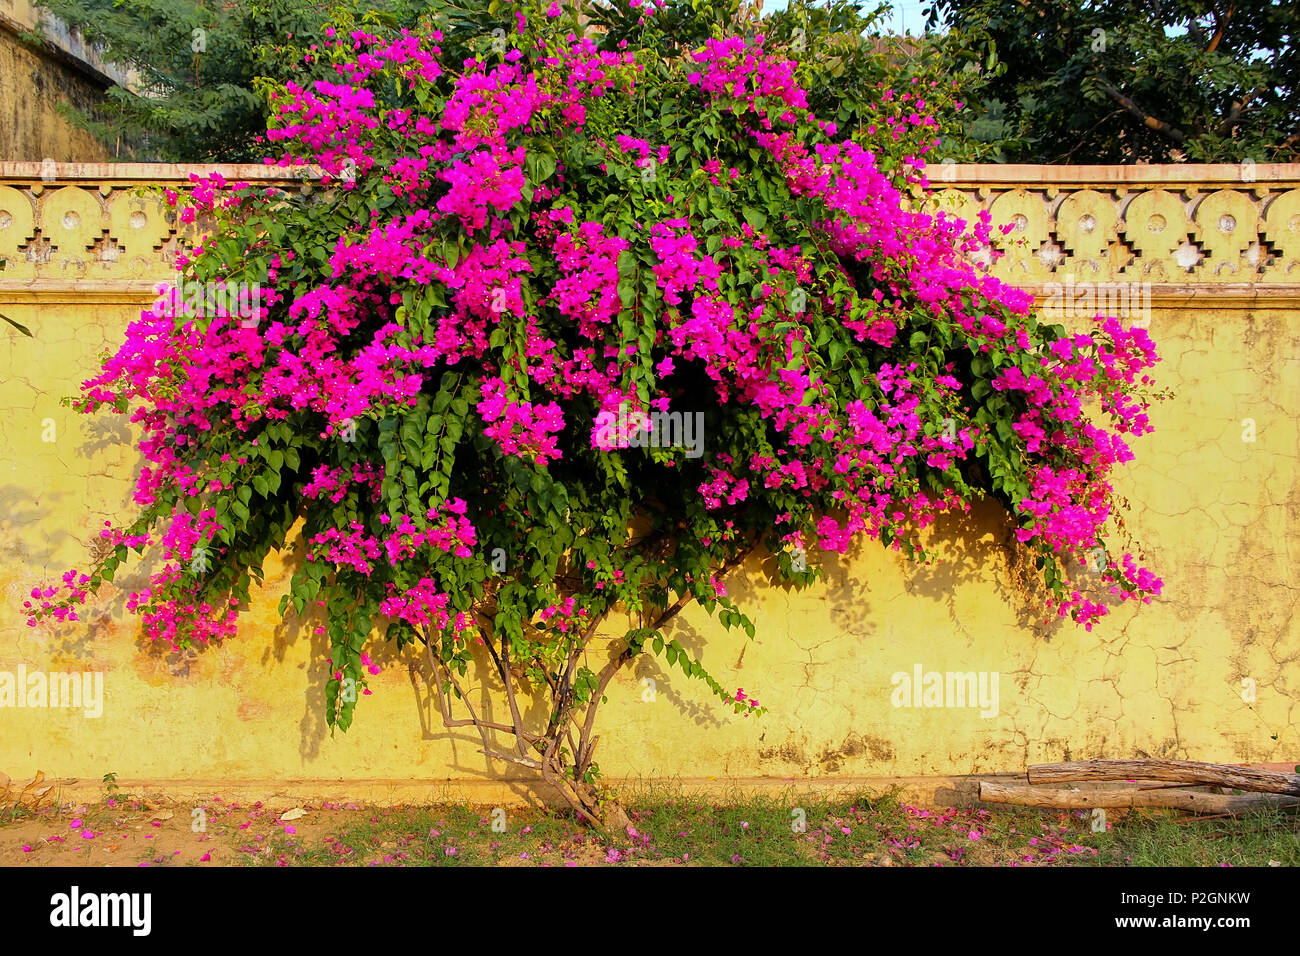 Bougainvillea tree with flowers against yellow wall at  Royal cenotaphs in Jaipur, Rajasthan, India. They were designated as the royal cremation groun Stock Photo